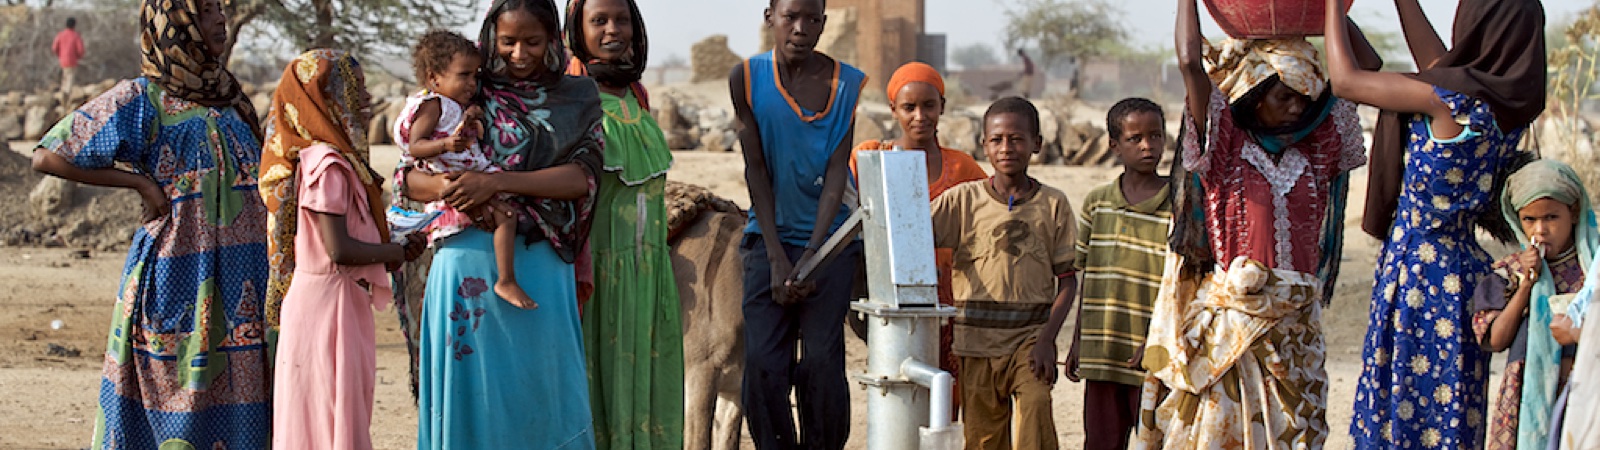 Chad Clean water, sanitation and healthcare